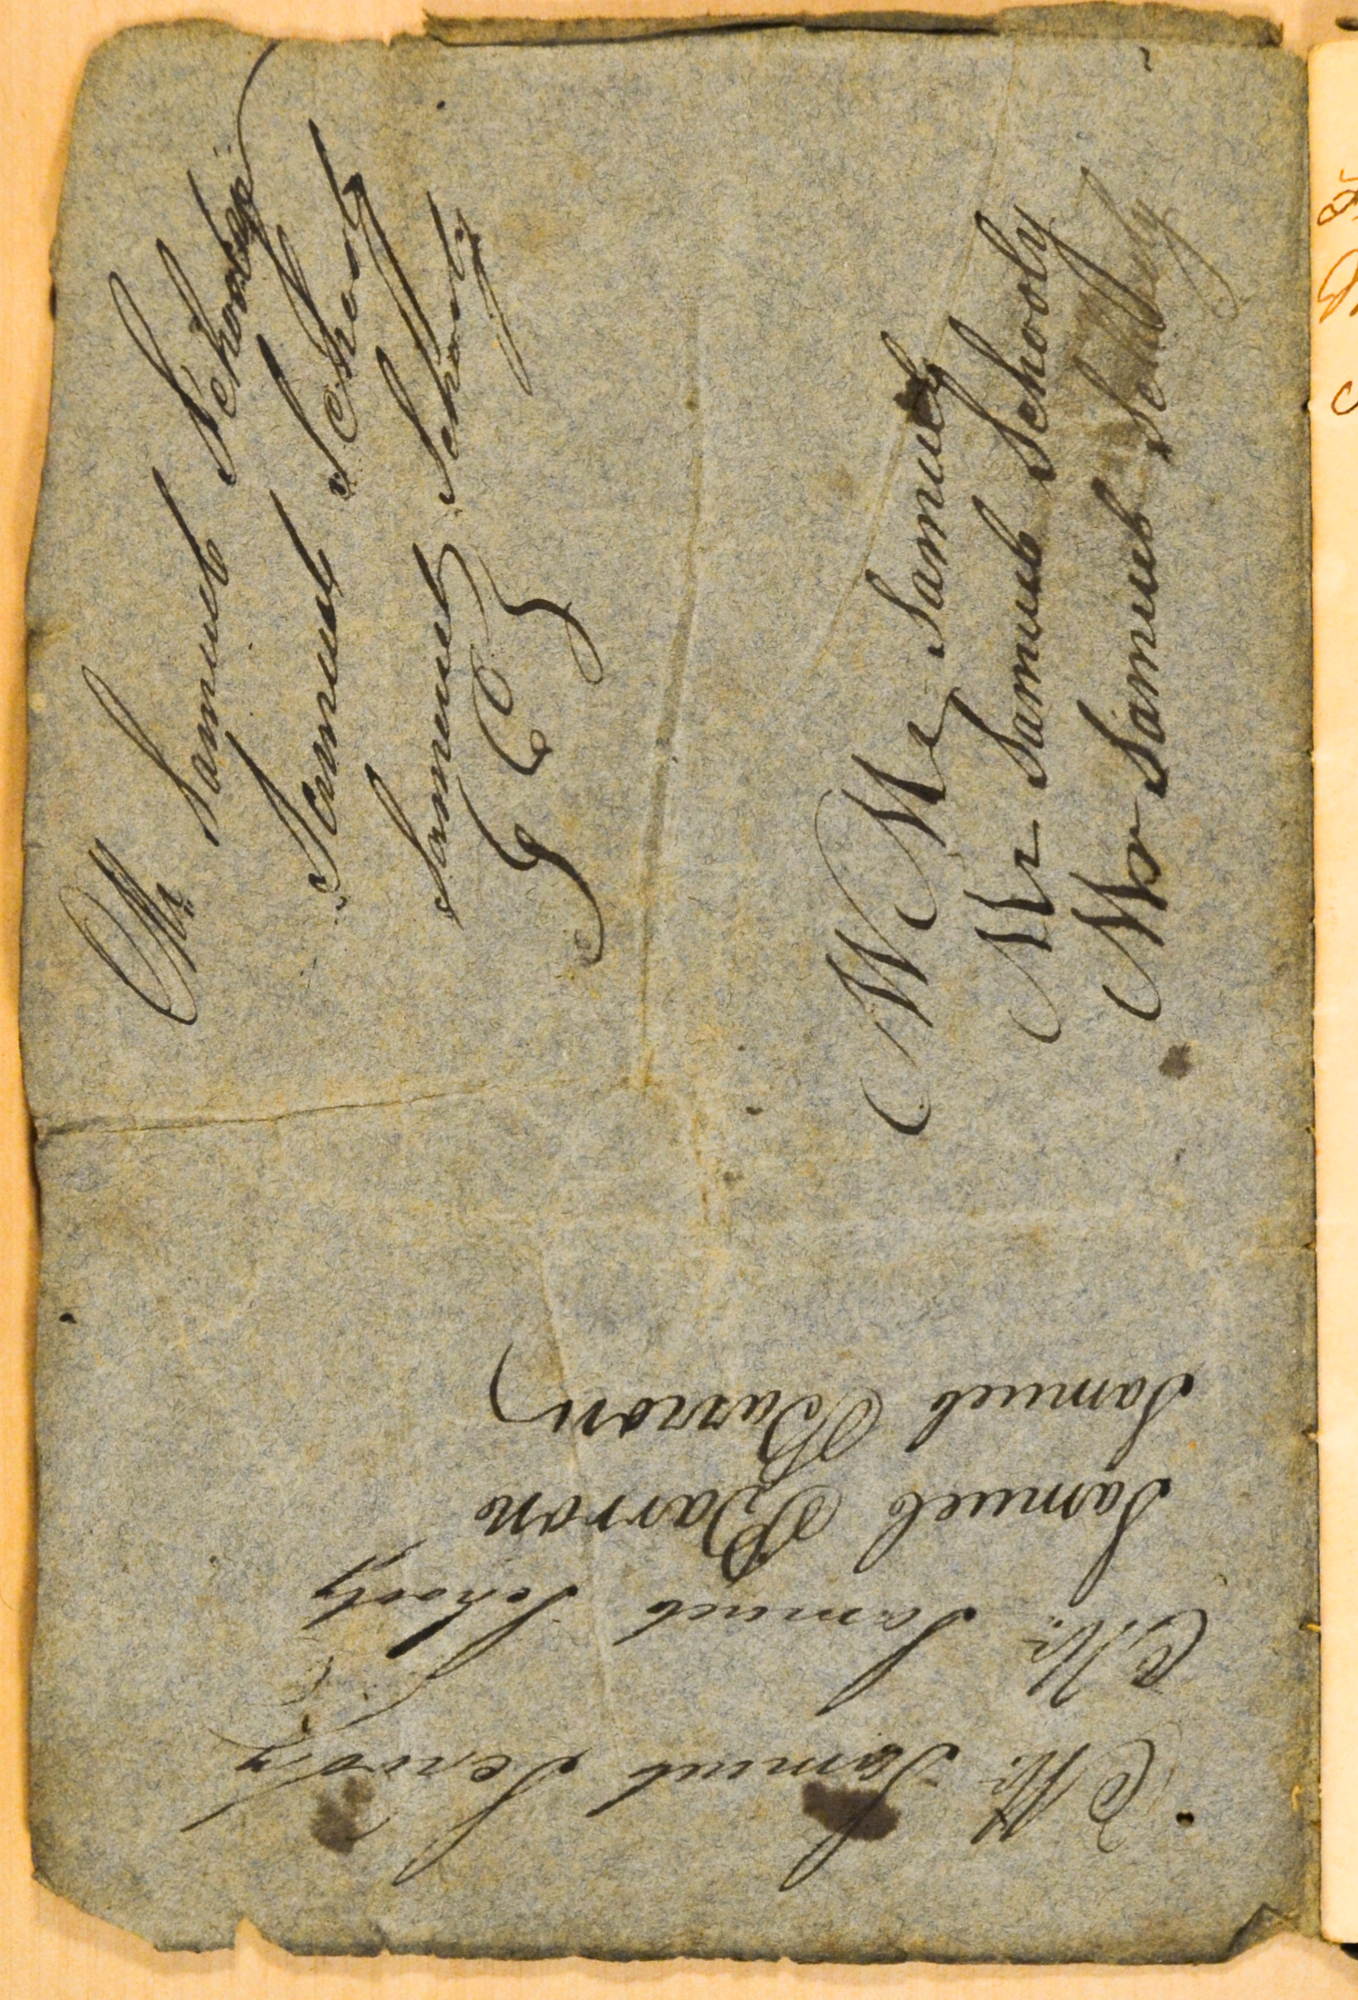 Samuel Schooley's names and others listed on the pages of this notebook.